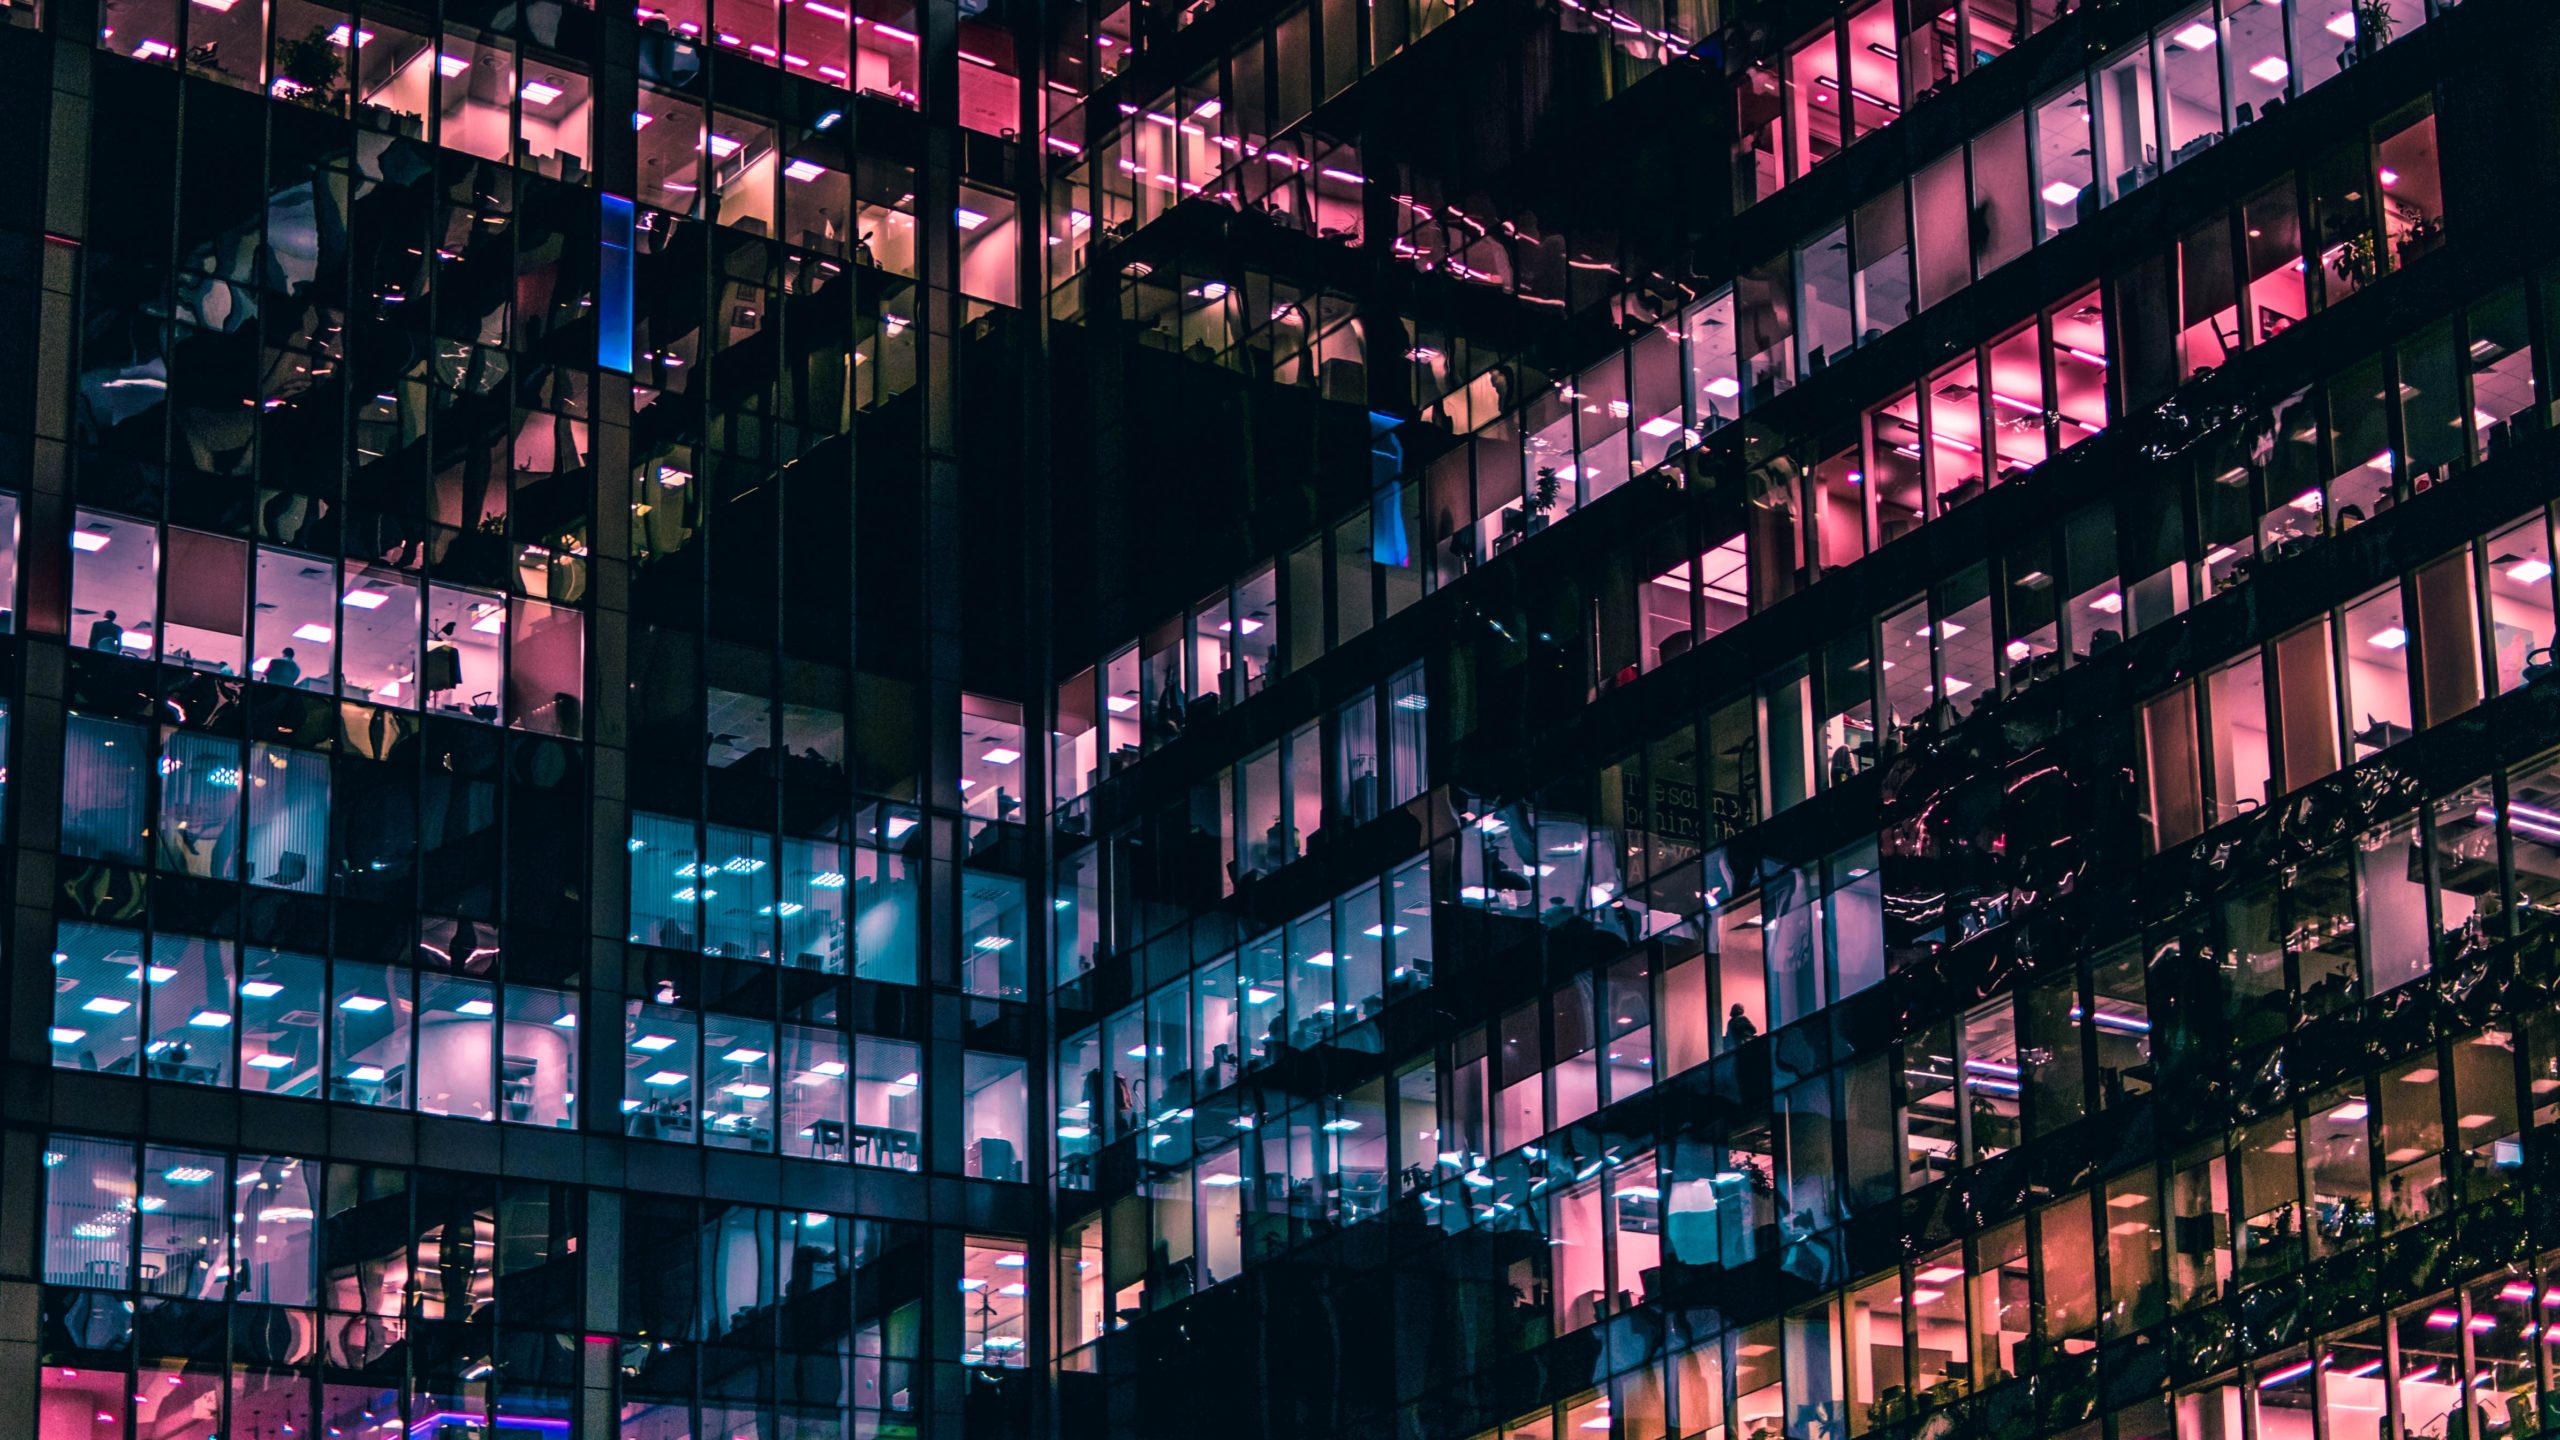 Windows of office blocks with workers sat in them at night